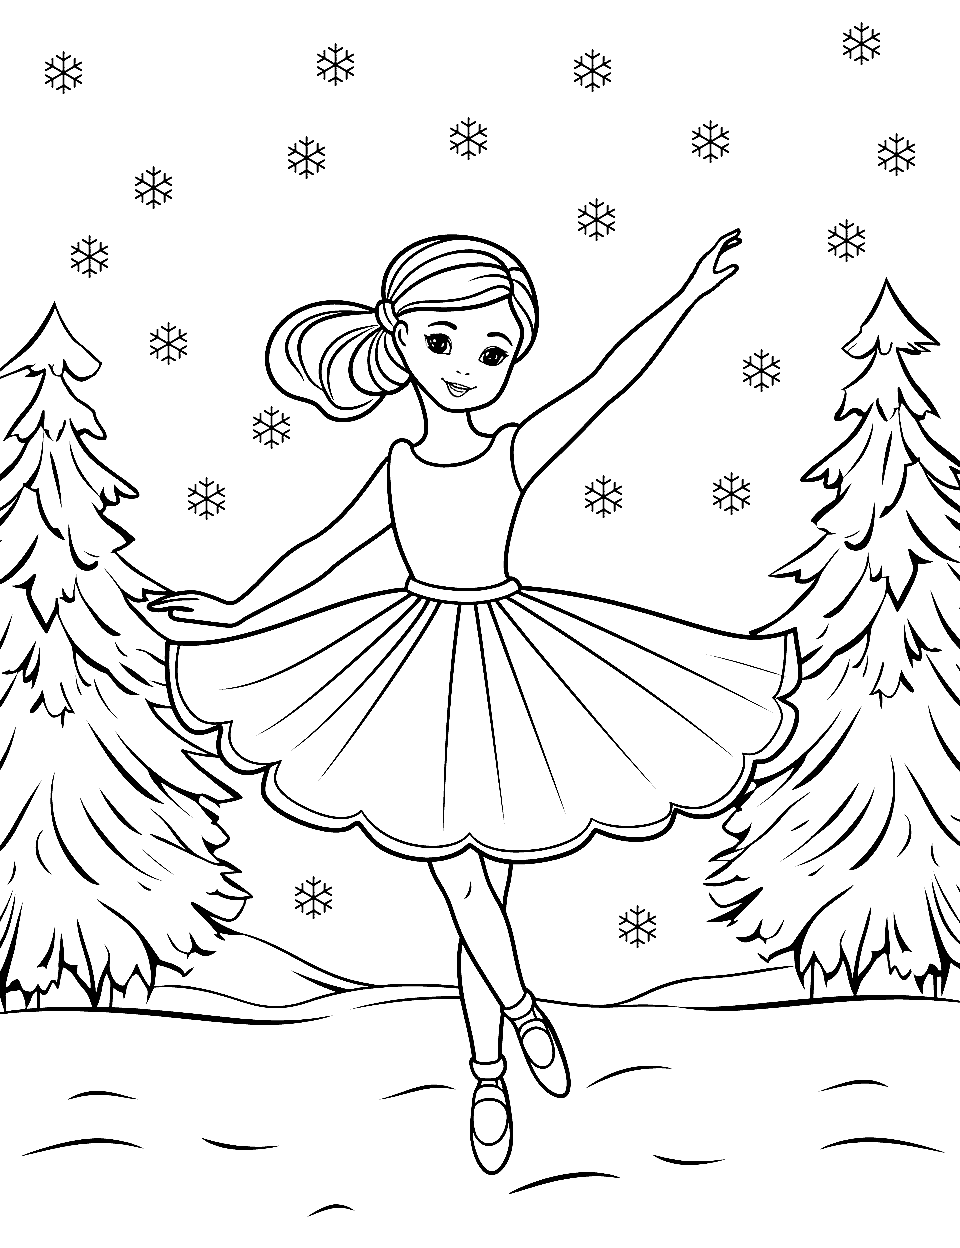 Ballerina in a Winter Wonderland Coloring Page - A ballerina dancing amidst snowflakes and winter scenery.